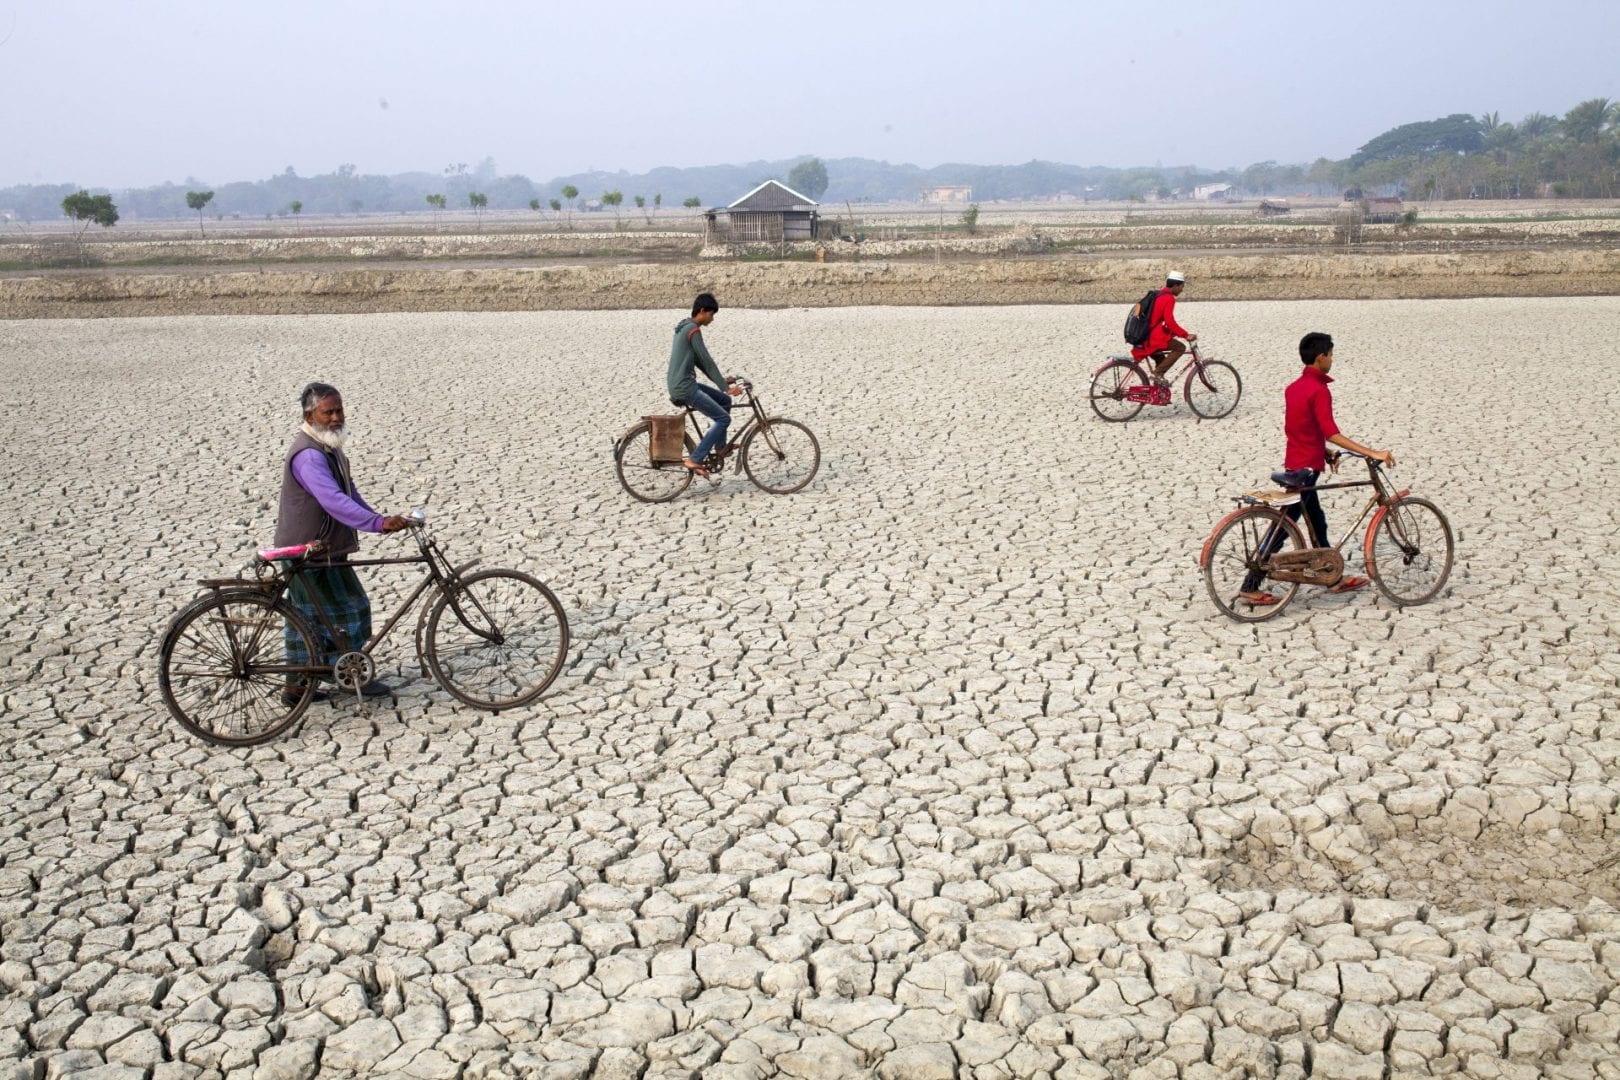 4 villagers on bicycles seen on a dried river bed